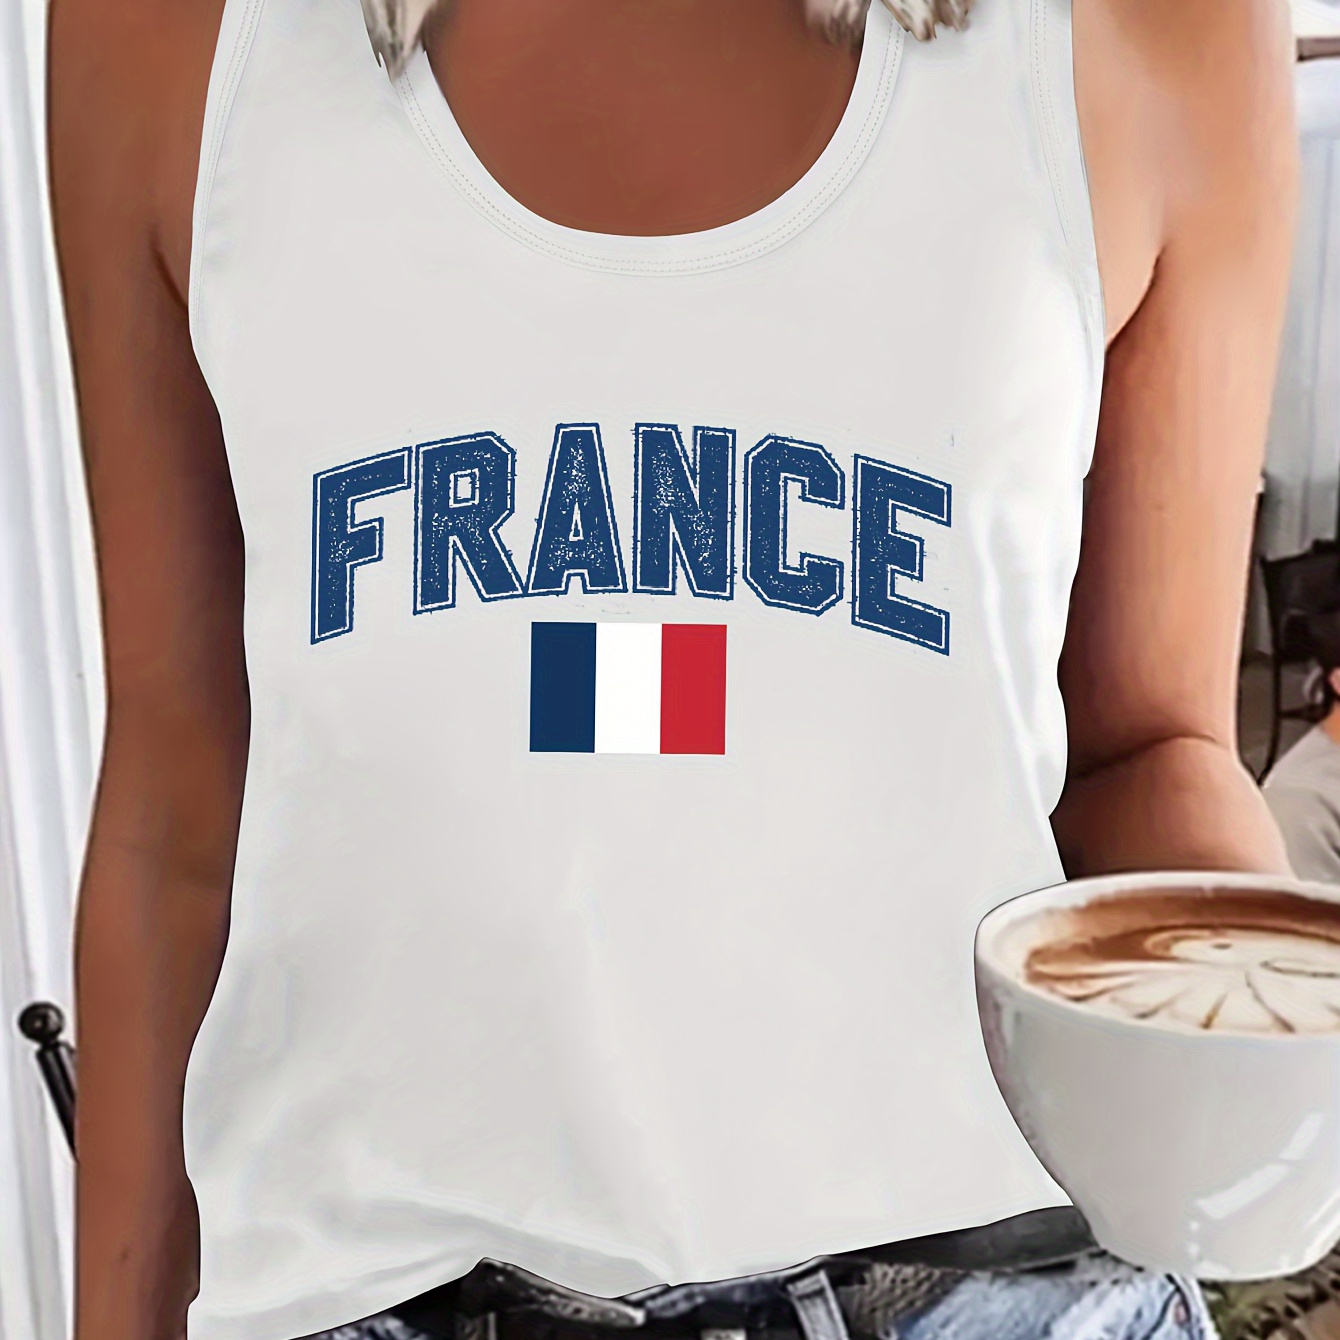 

France Print Crew Neck Tank Top, Sleeveless Casual Top For Summer & Spring, Women's Clothing